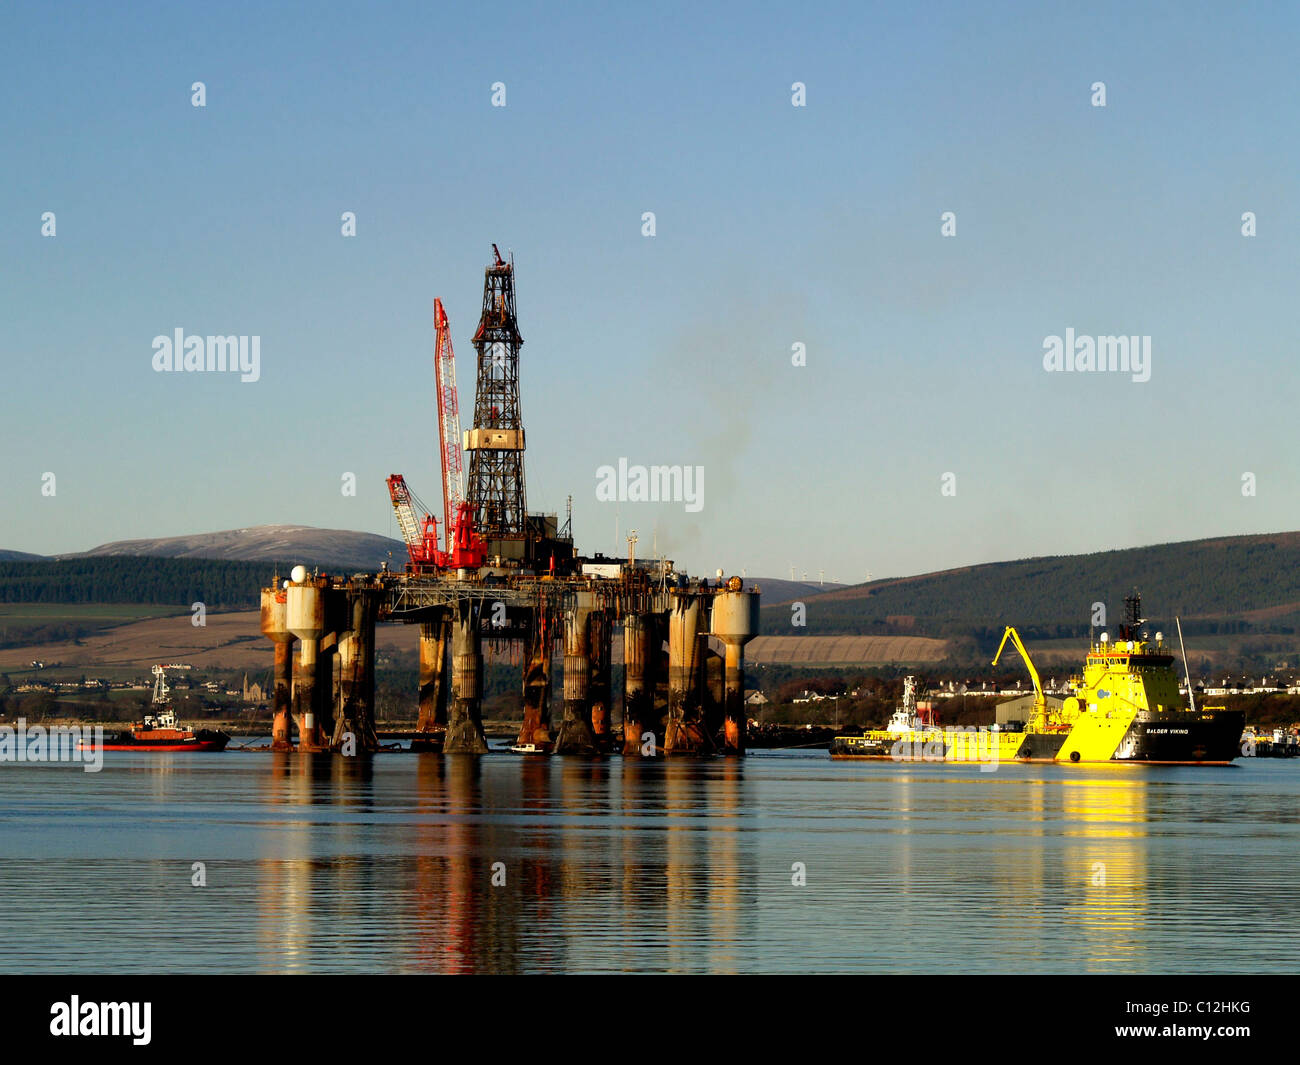 An anchor handling vessel and tug maneuver a semi-submersible oil rig alongside the dock at Invergordon in the Cromarty Firth. Stock Photo